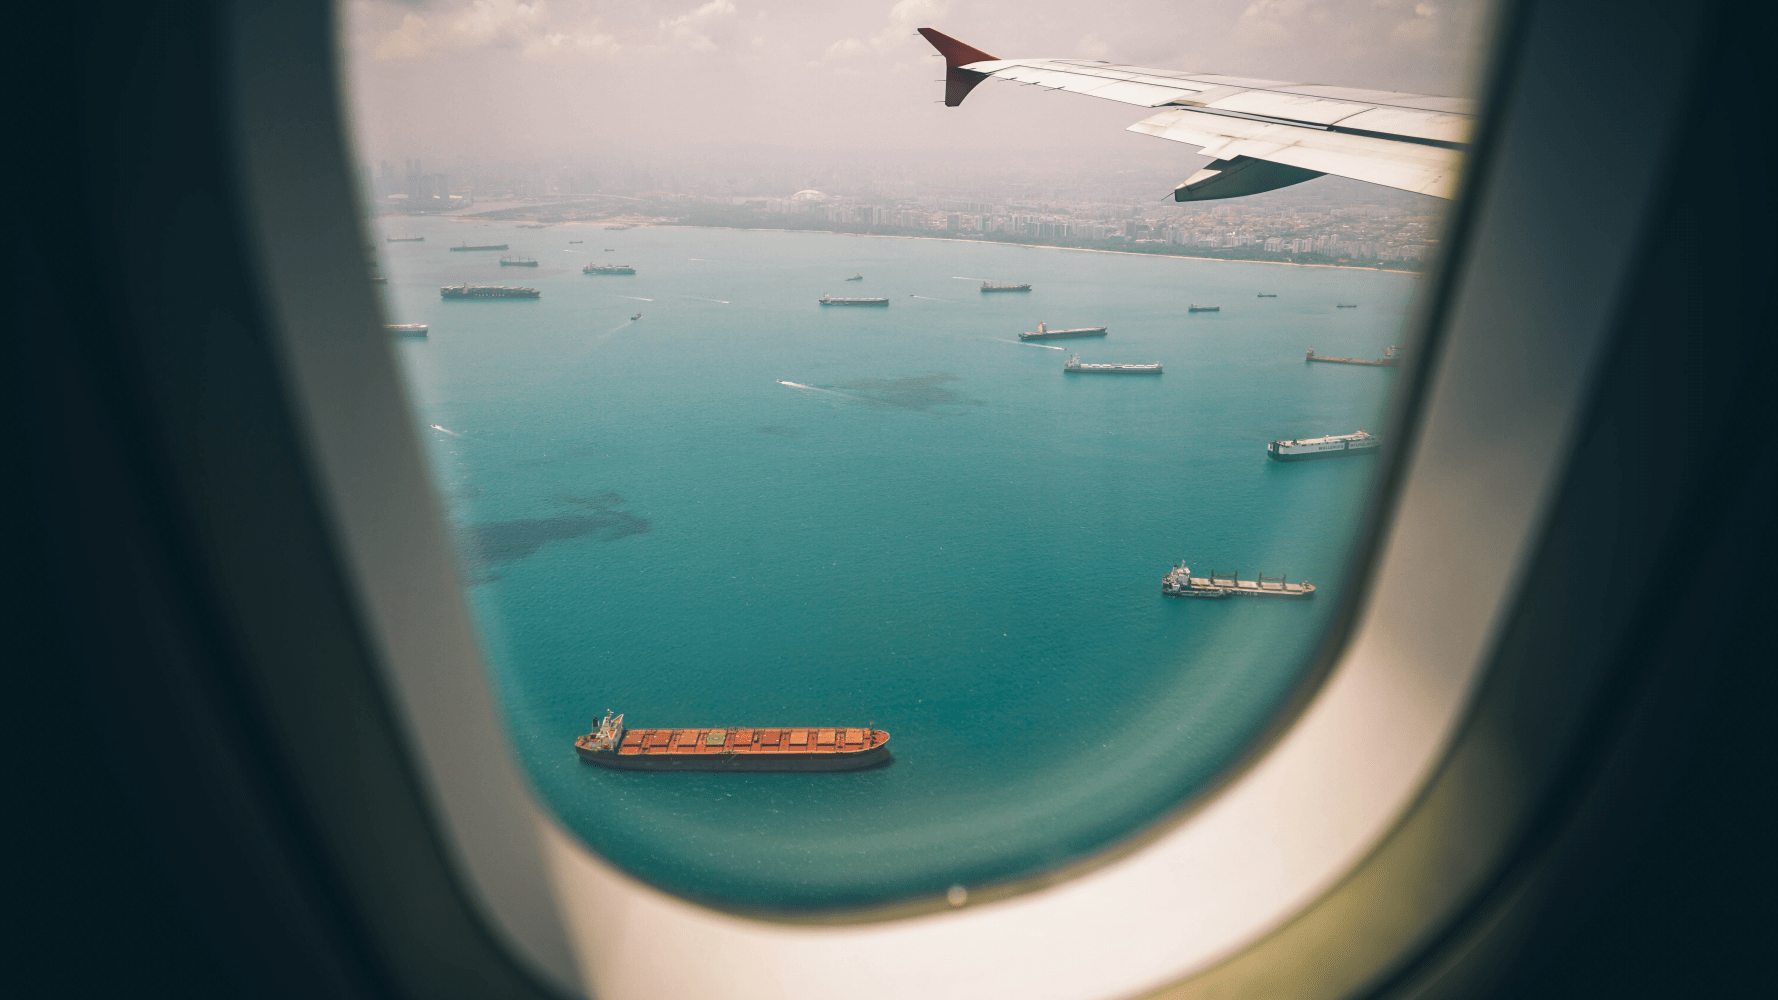 View from the passenger window of a commercial jet overlooking a busy harbor and large container ships